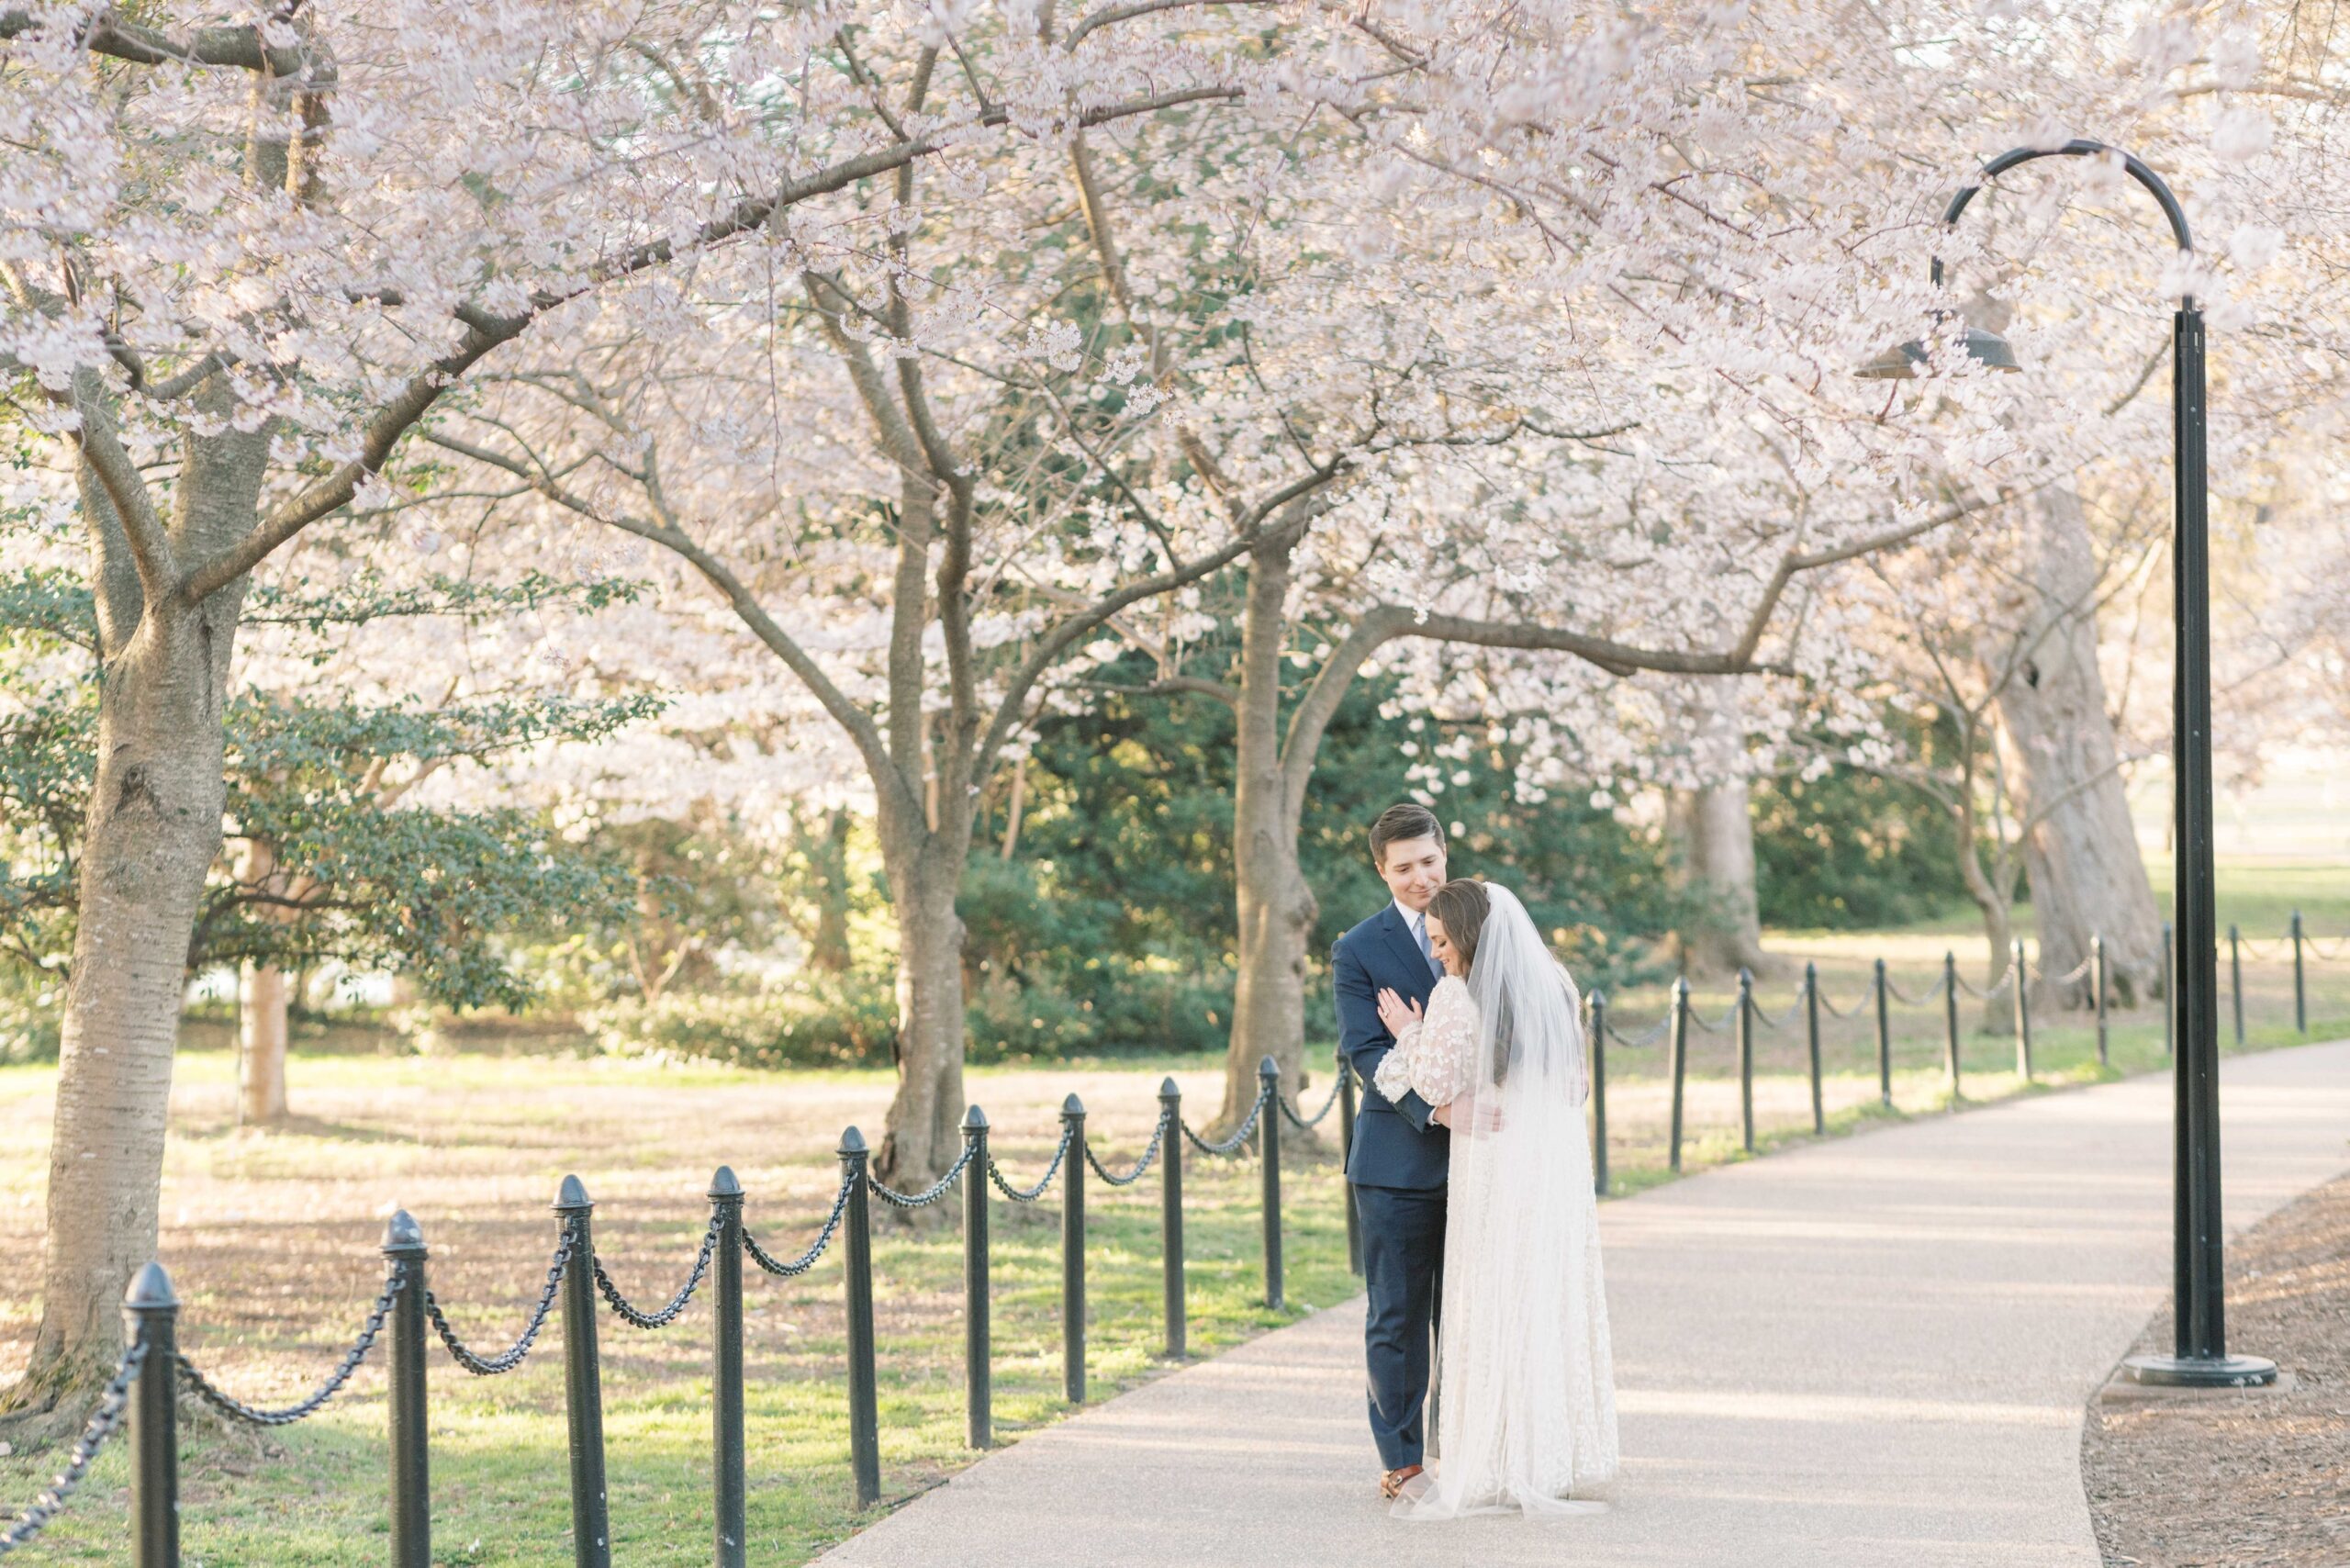 A stunning cherry blossom elopement with portraits at the Tidal Basin in Washington, DC during peak bloom. Ceremony at the DC War Memorial.